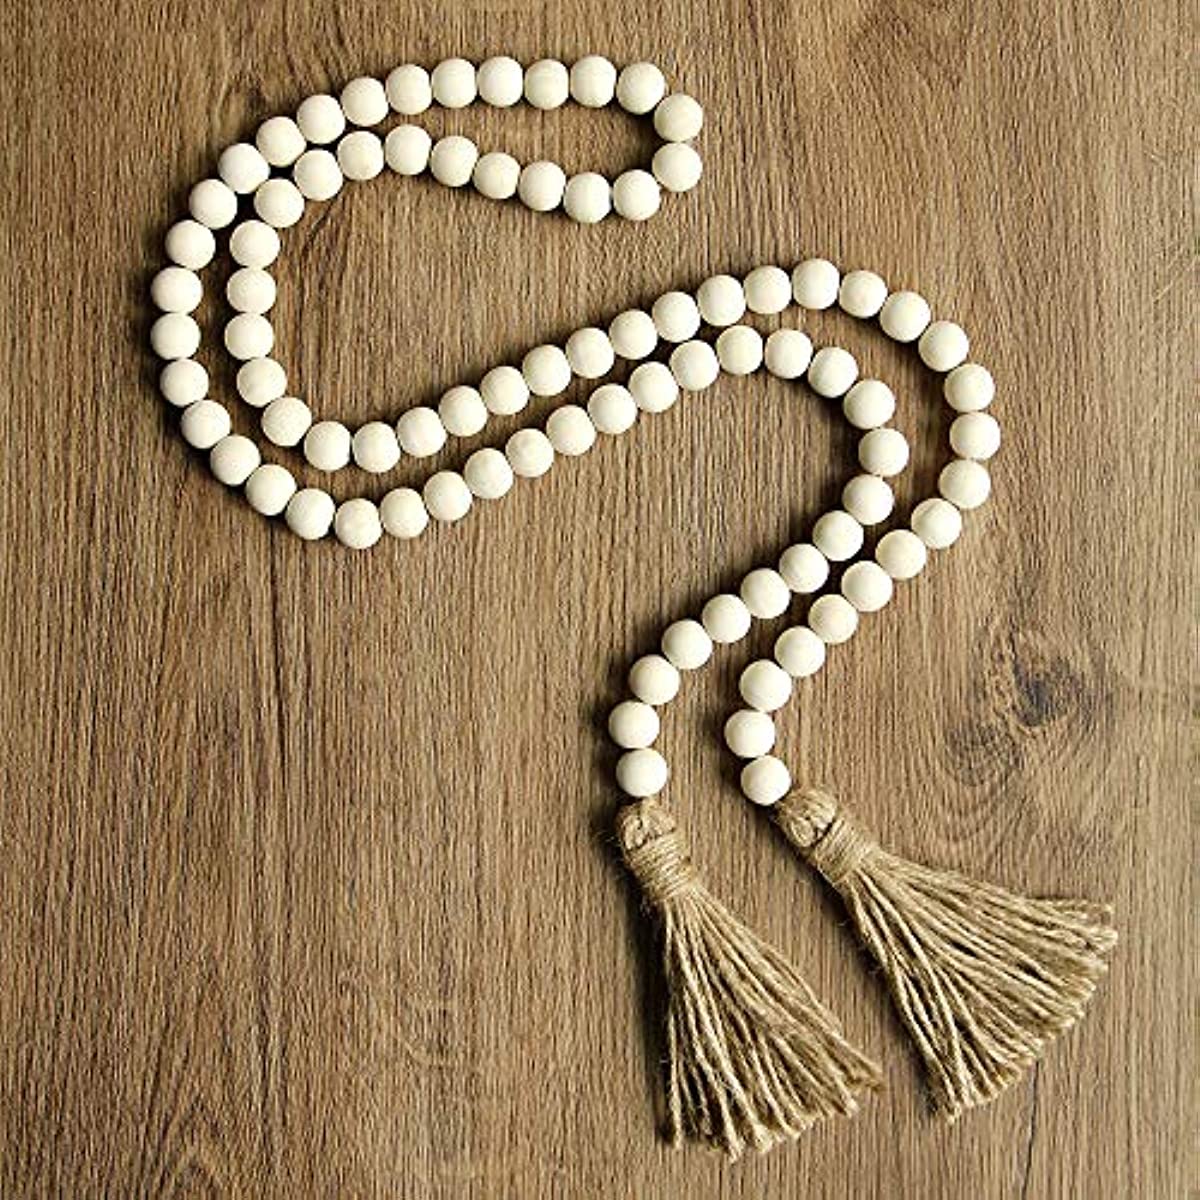  TEHAUX Heart Beads Clay Beads Refill 40pcs Farmhouse Beads  Wooden Beads Valentine Garland Beads Crafts Jewelry Wood Clay Tassel  Valentine Wood Beads Farmhouse Craft Jewelry Beads : Arts, Crafts & Sewing